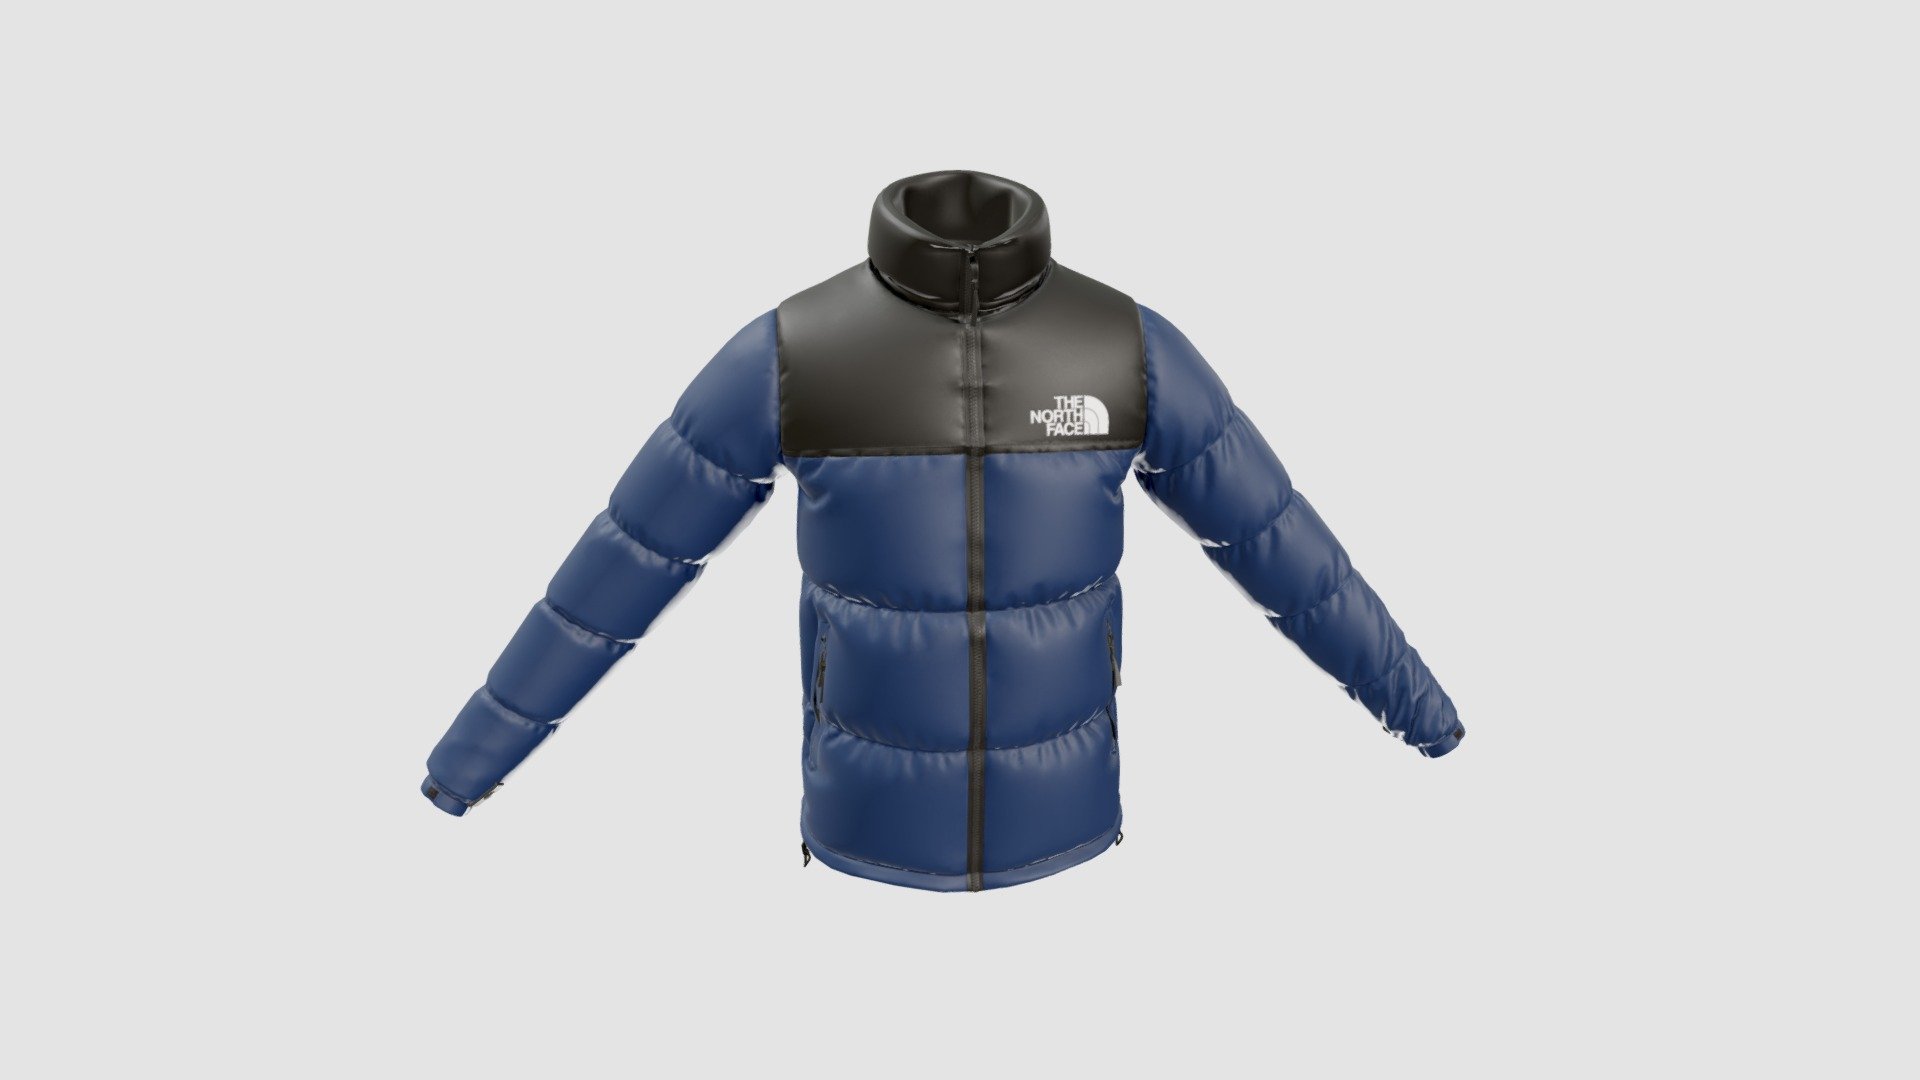 Check out this high quality low-poly 3D model of a North Face Nuptse Jacket. This is an optimised 3D model for faster loading times in AR view. 

For your 3D modelling requirements or if you wish to purchase this model, connect with us at info@shinobu3d.com.

We offer premium quality low poly 3D assets/models for AR/VR applications, 3D visualisations, 3D product configurators, 3D printing &amp; 3D animations.

Visit https://www.shinobu3d.com for more on us 3d model